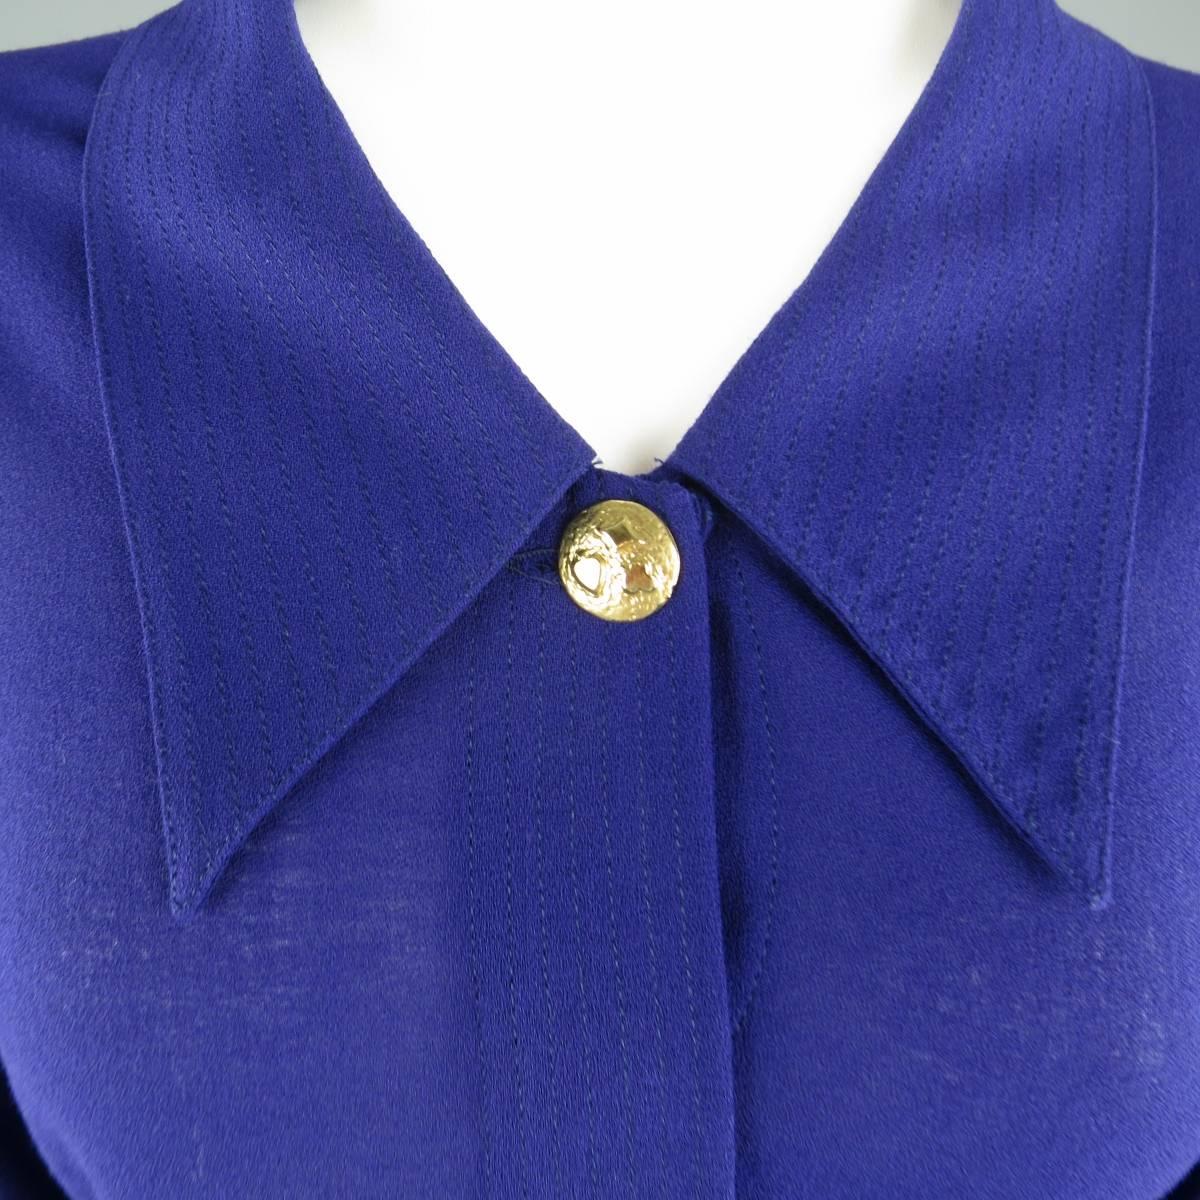 Fabulous vintage 1980's GIANNI VERSACE blouse comes in a purple crepe fabric and features an oversized pointed collar, hidden placket button closure front, and French cuffs with yellow gold tone heart, club, and diamond playing card symbol button